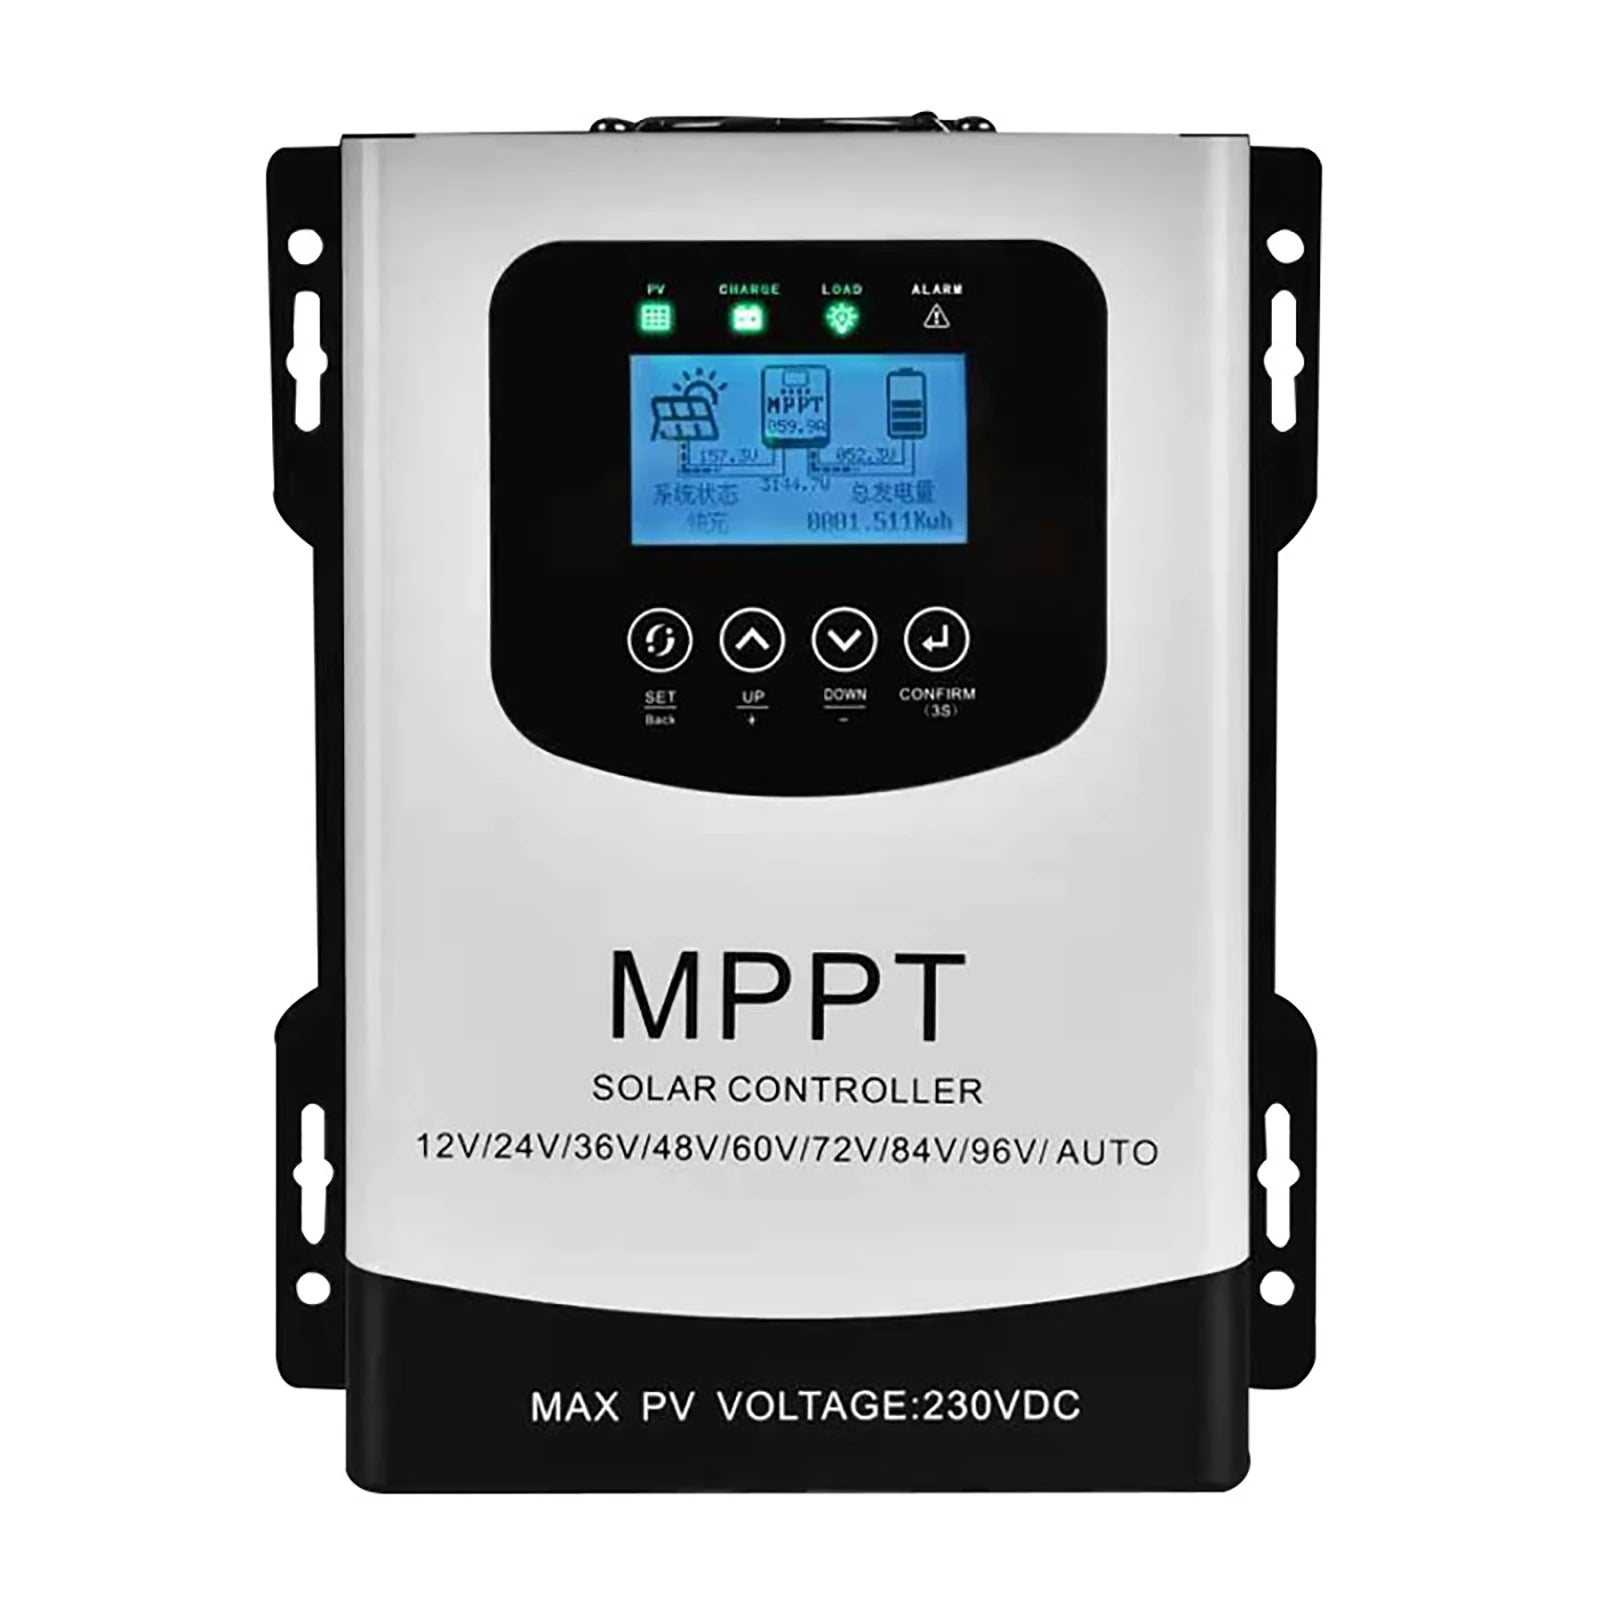 50A 60A MPPT Solar Charge Controller, Charge controller for LiFePO4 batteries: supports various voltages and features auto max voltage and PWM charging.